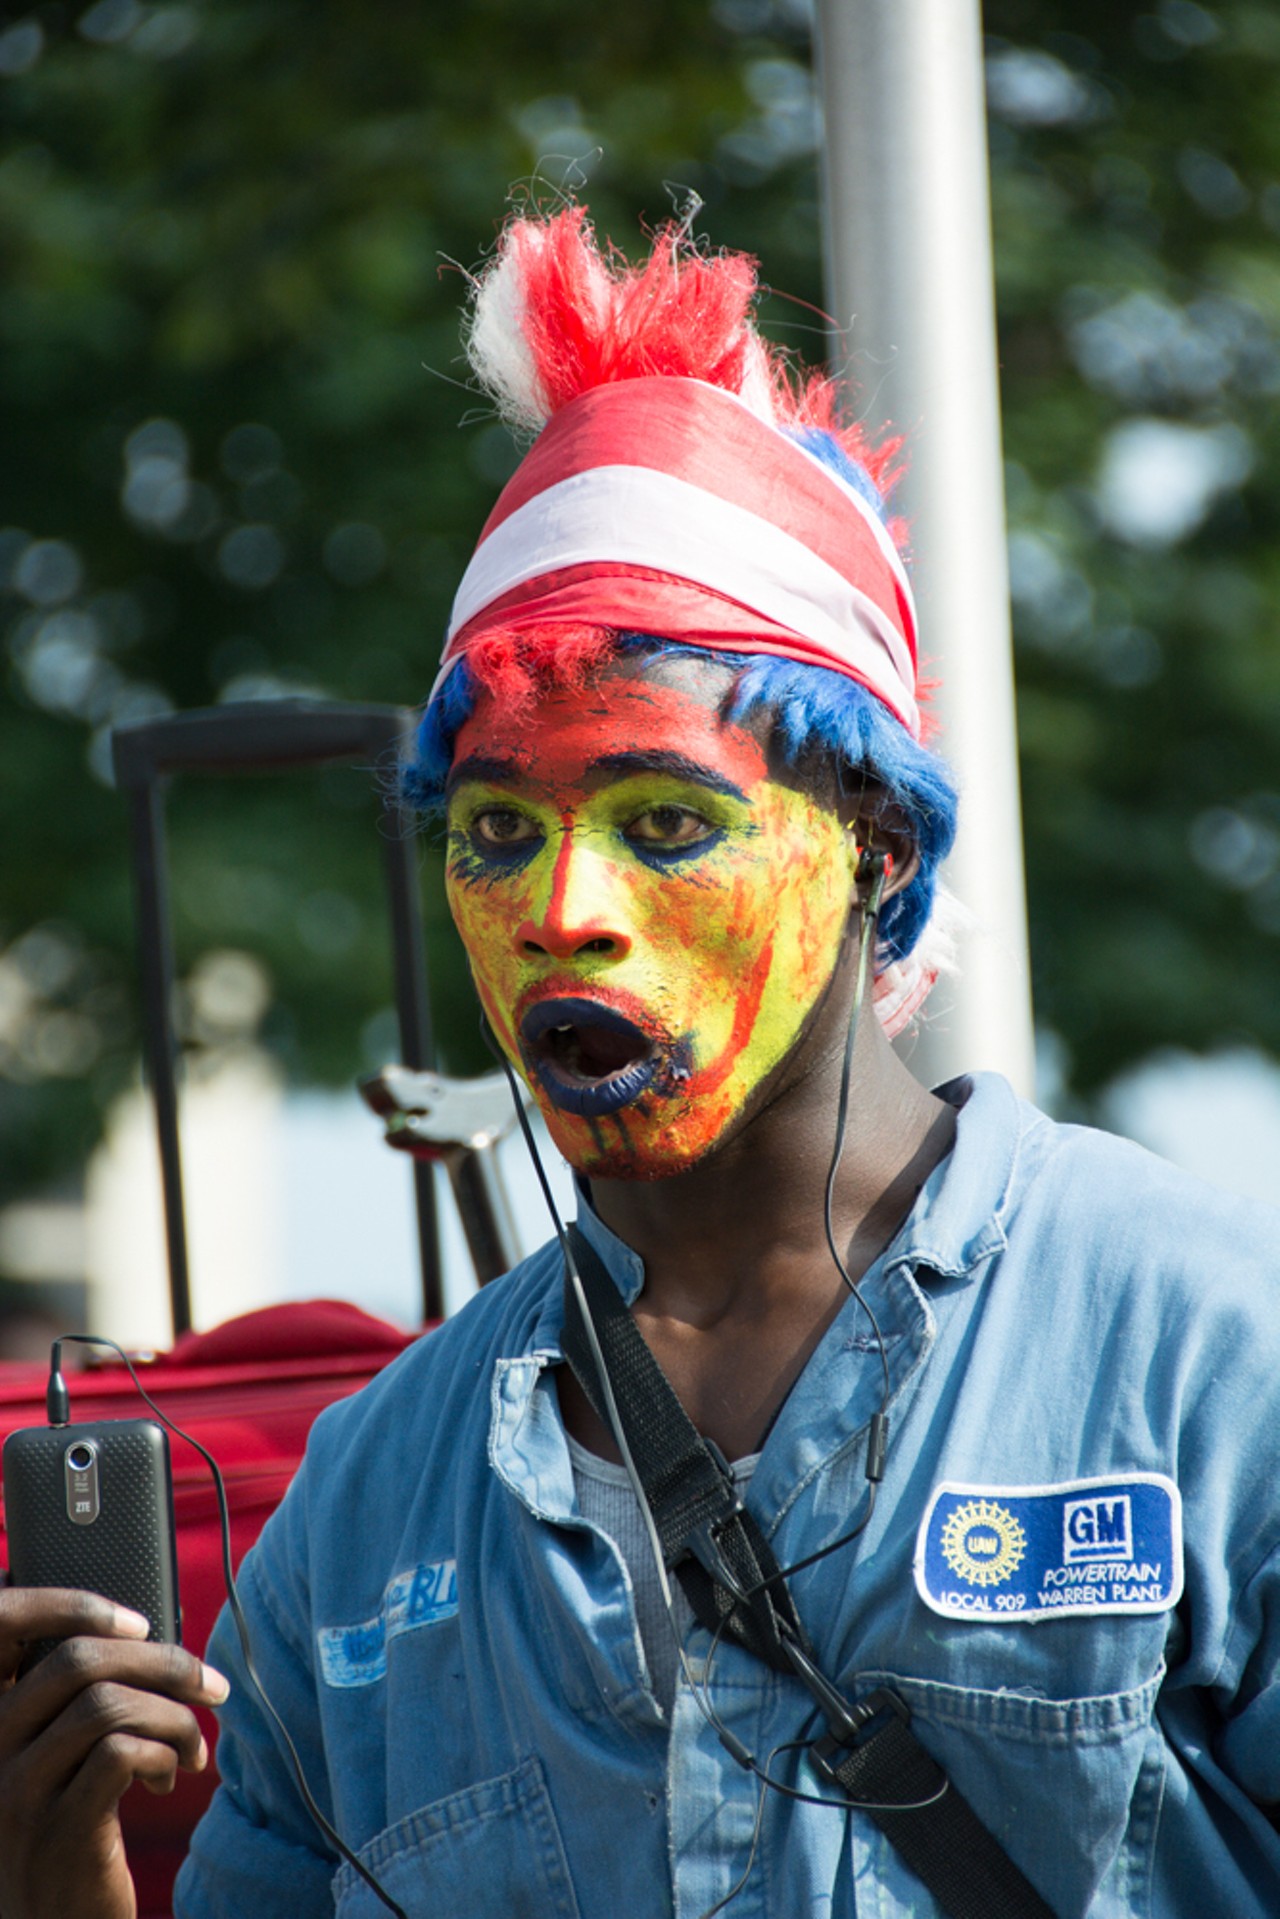 A street performer with very fashionable makeup.